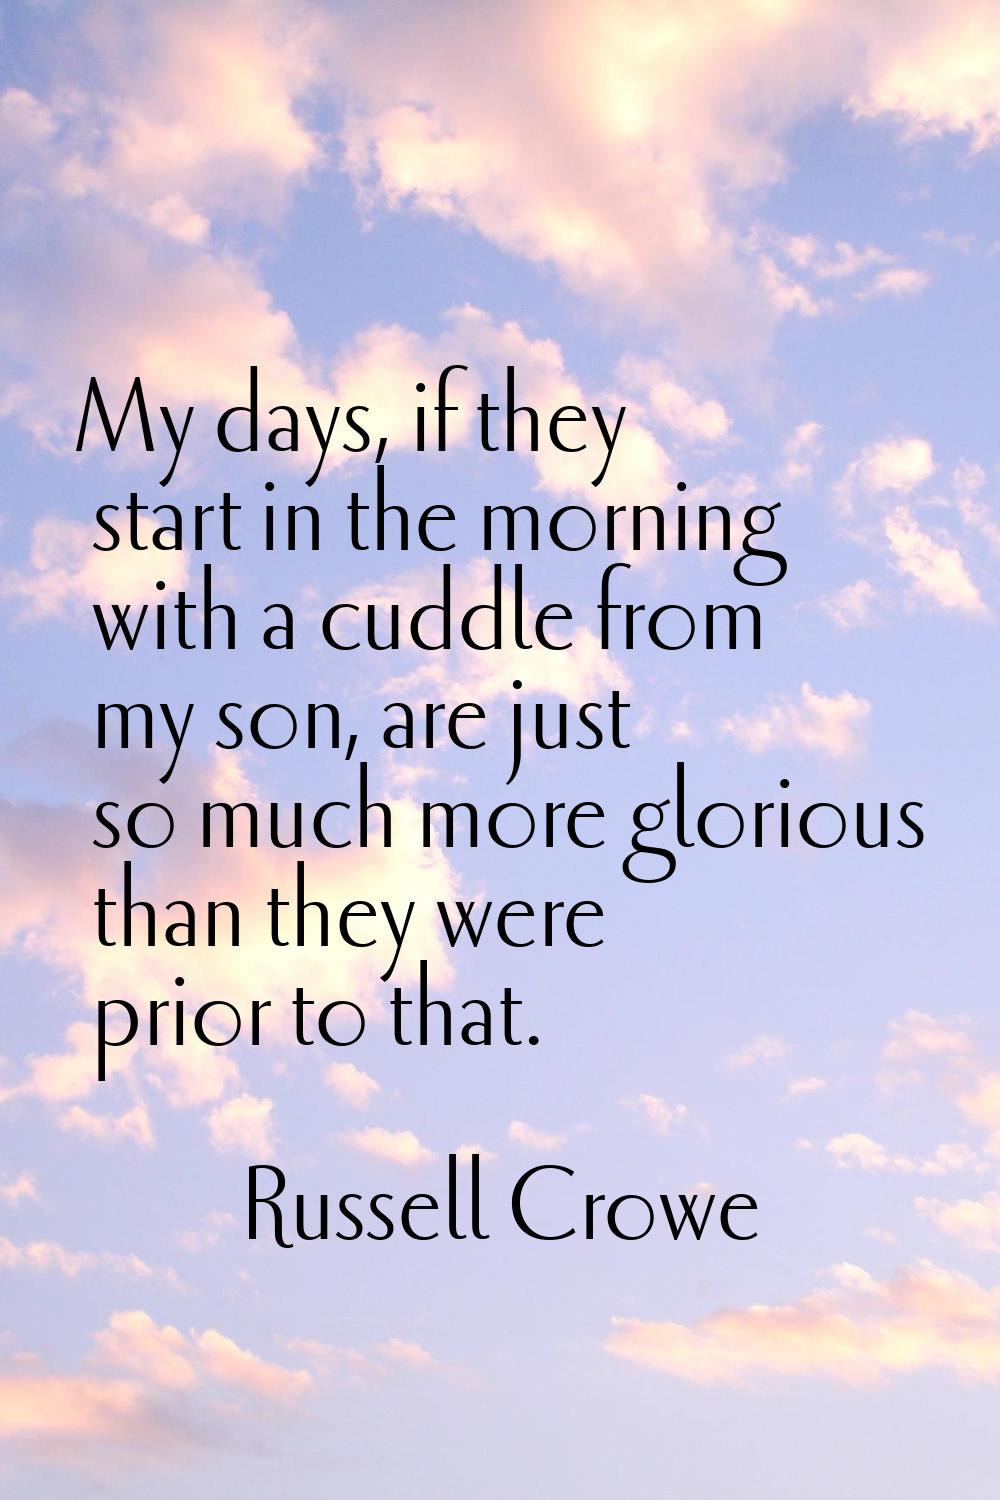 My days, if they start in the morning with a cuddle from my son, are just so much more glorious tha